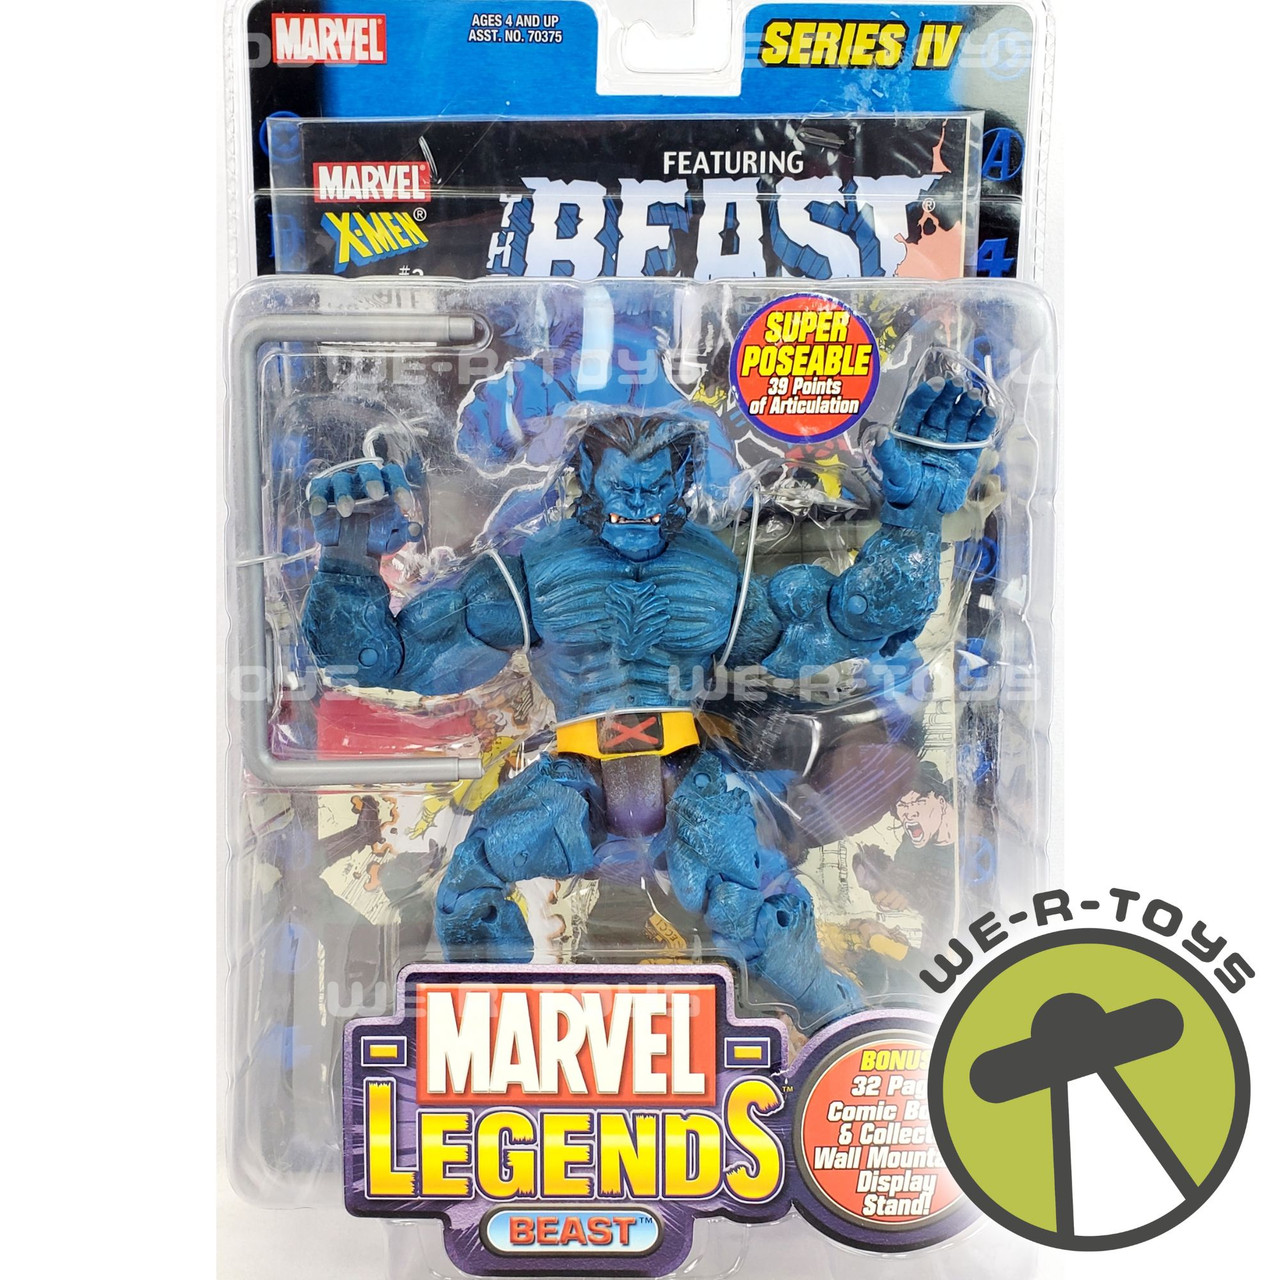 Marvel Legends Series 4 X-Men Beast Action Figure with Comic Book 2003  70379 - We-R-Toys